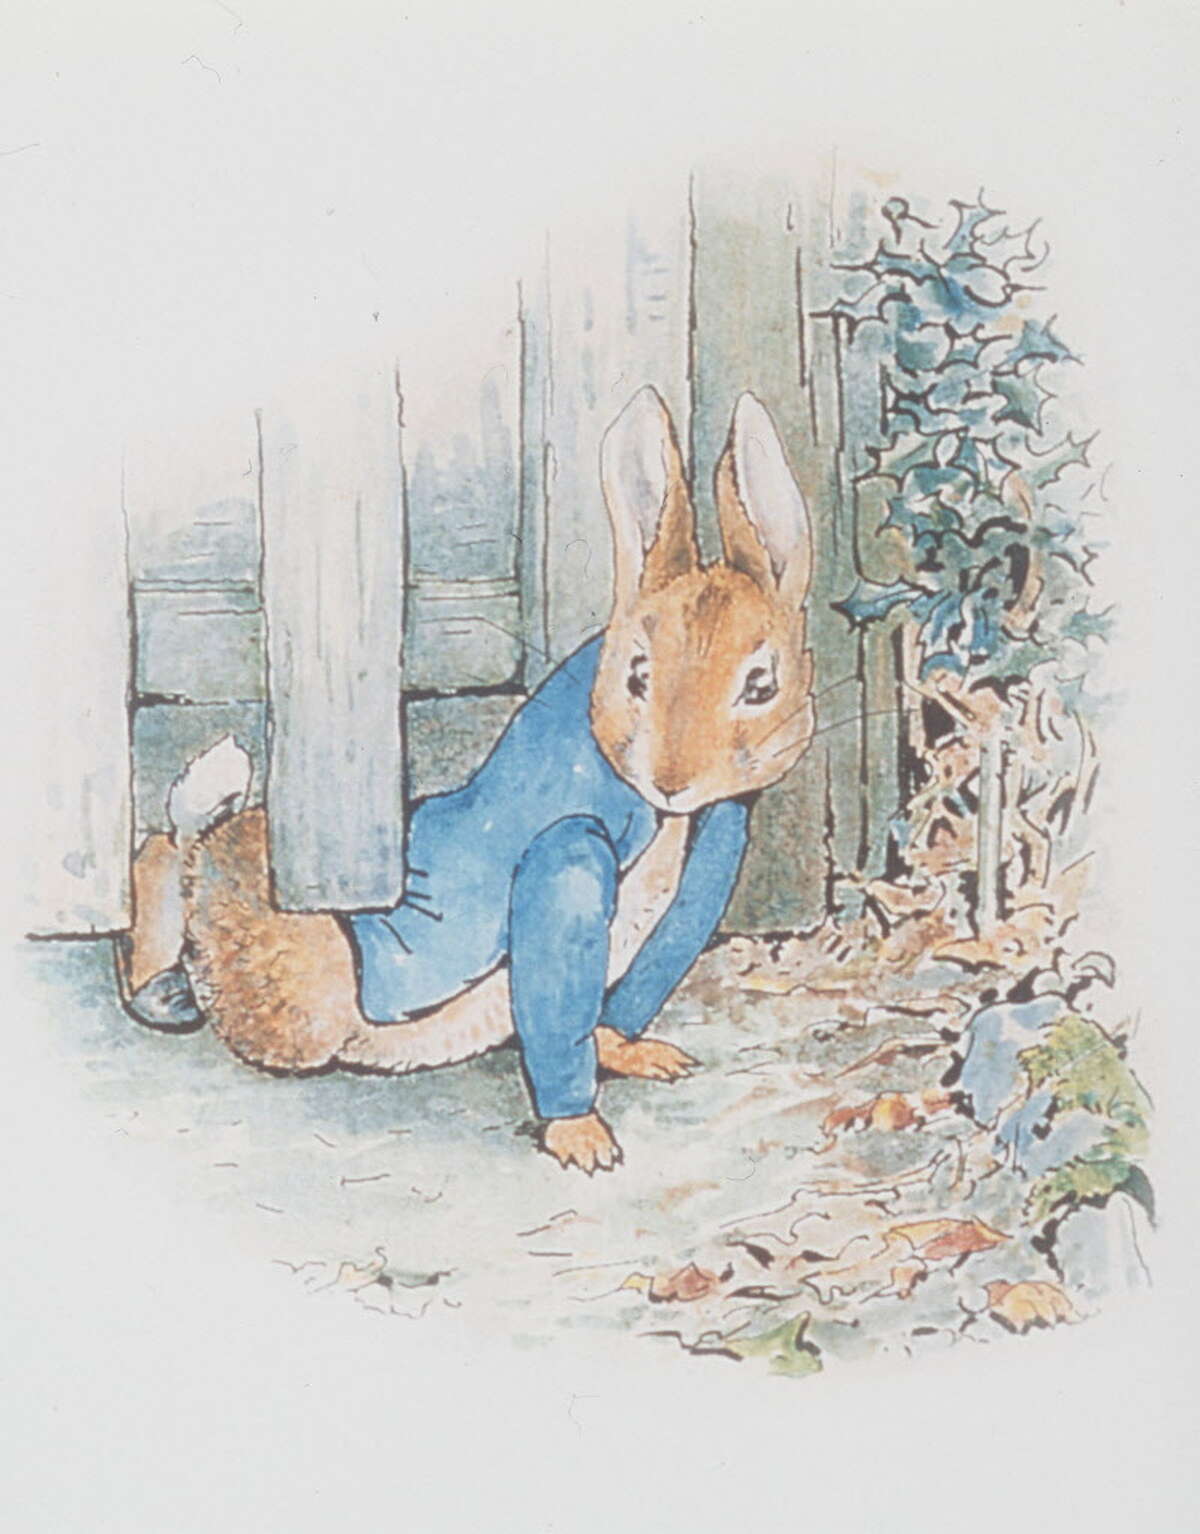 Early years Helen Beatrix Potter, called Beatrix, was born on July 28, 1866 to wealthy British parents. She was educated at home by governesses, including Annie Carter Moore.She loved drawing plants and animals and spending tme in nature.